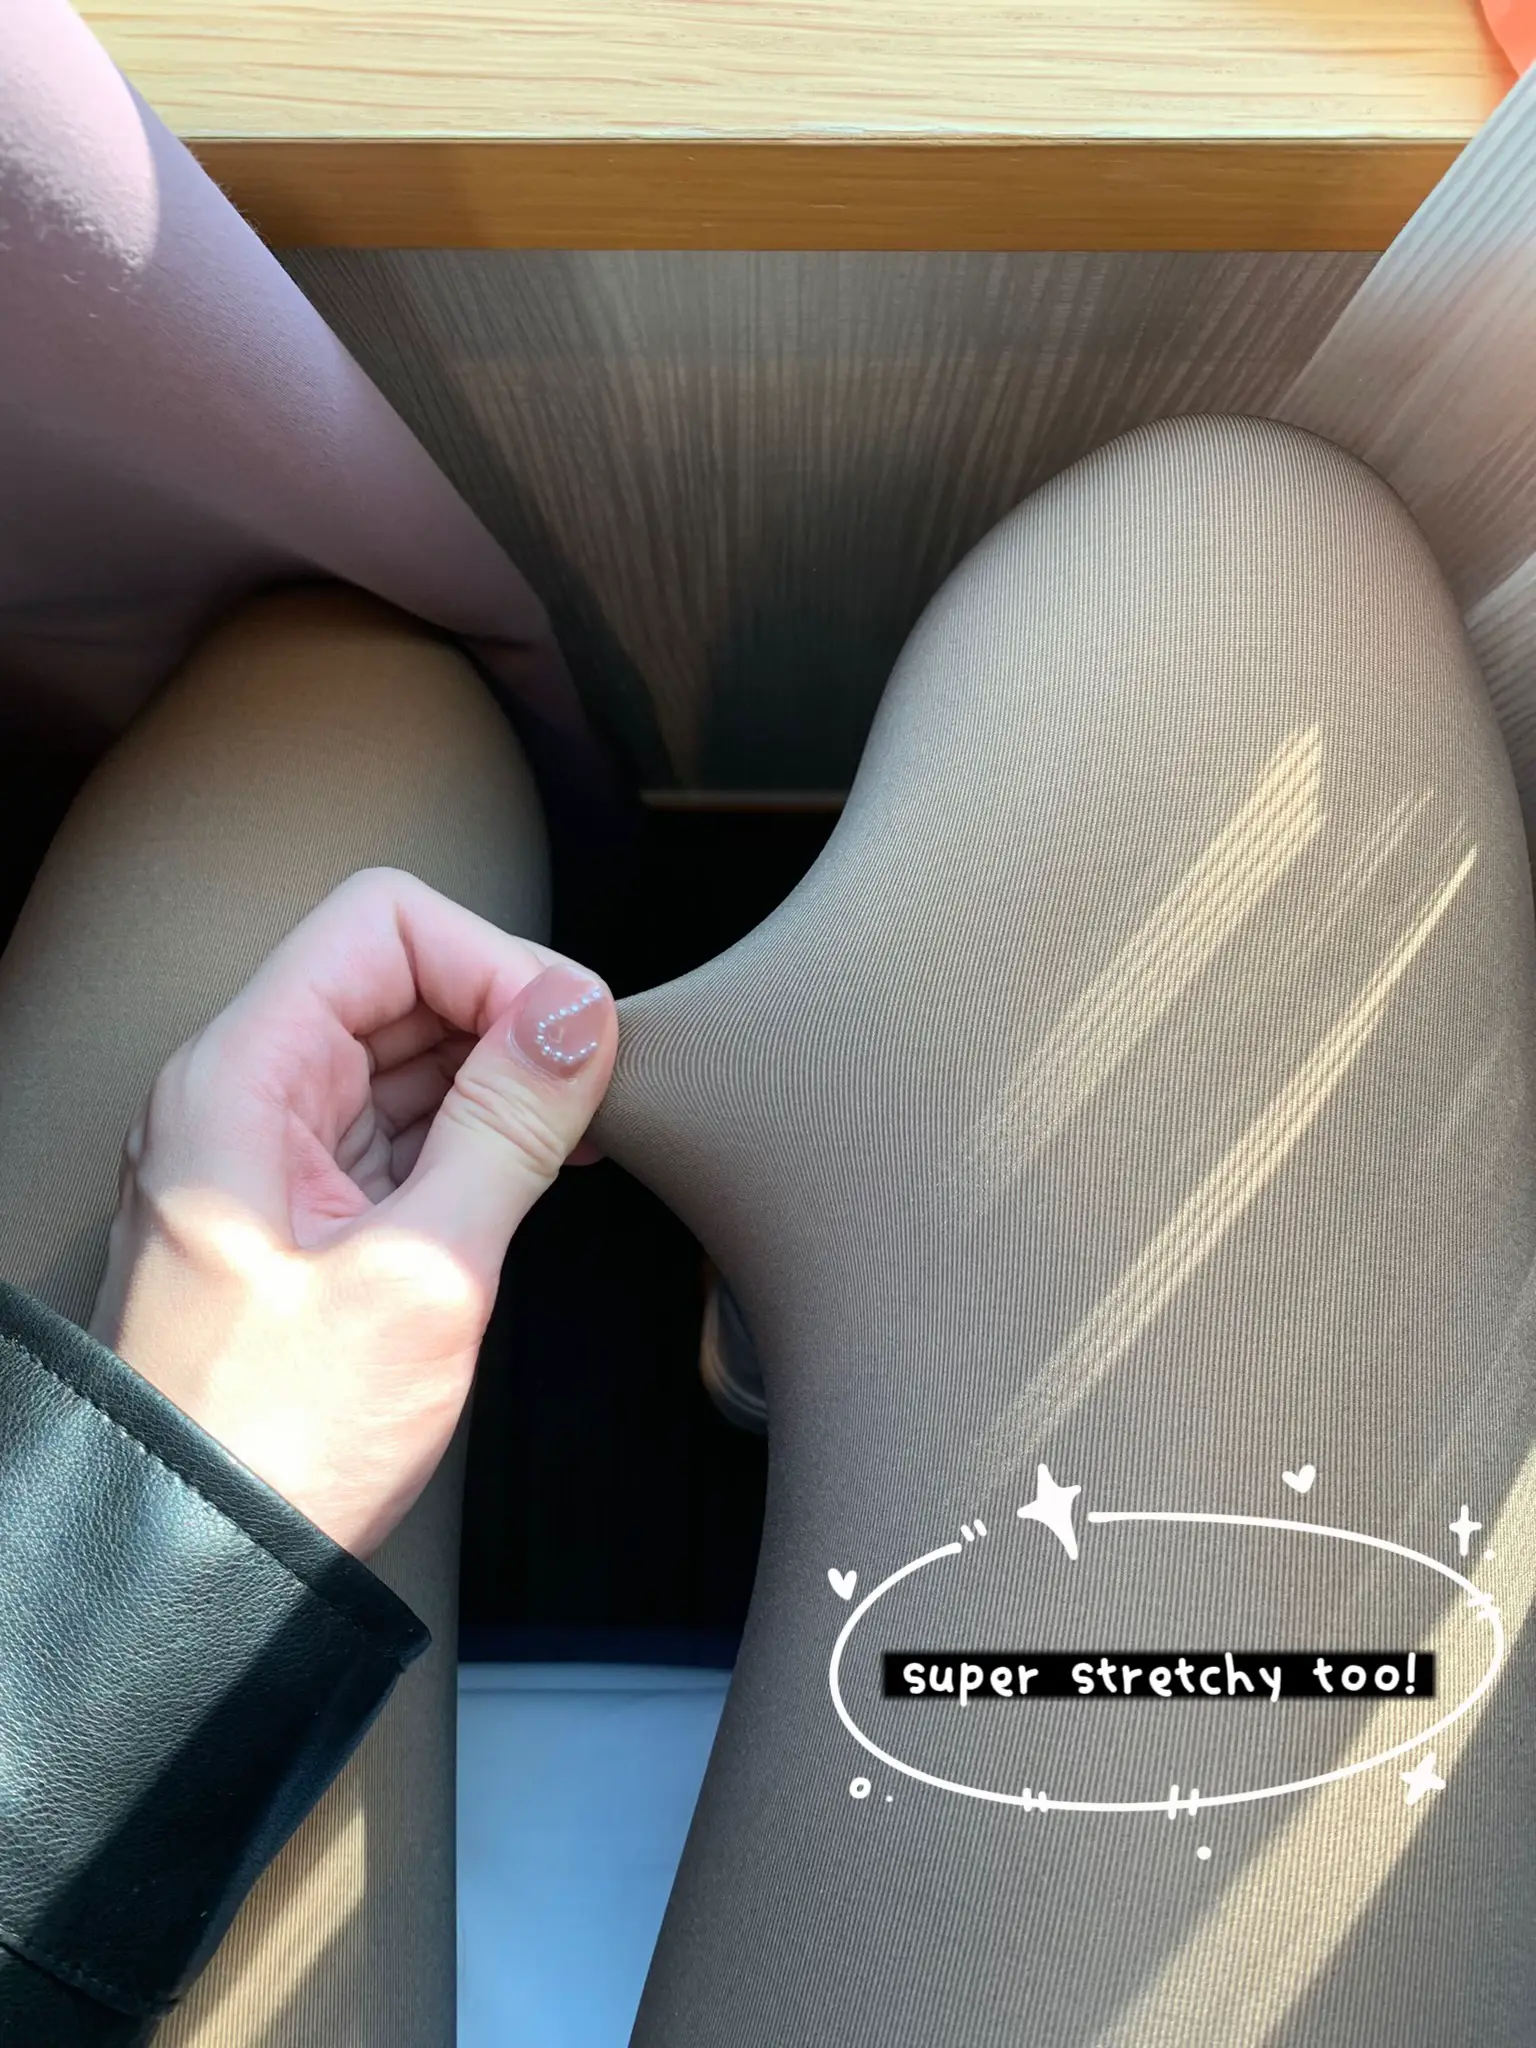 comparing real vs fake lululemon tights, Gallery posted by Faithfullyours